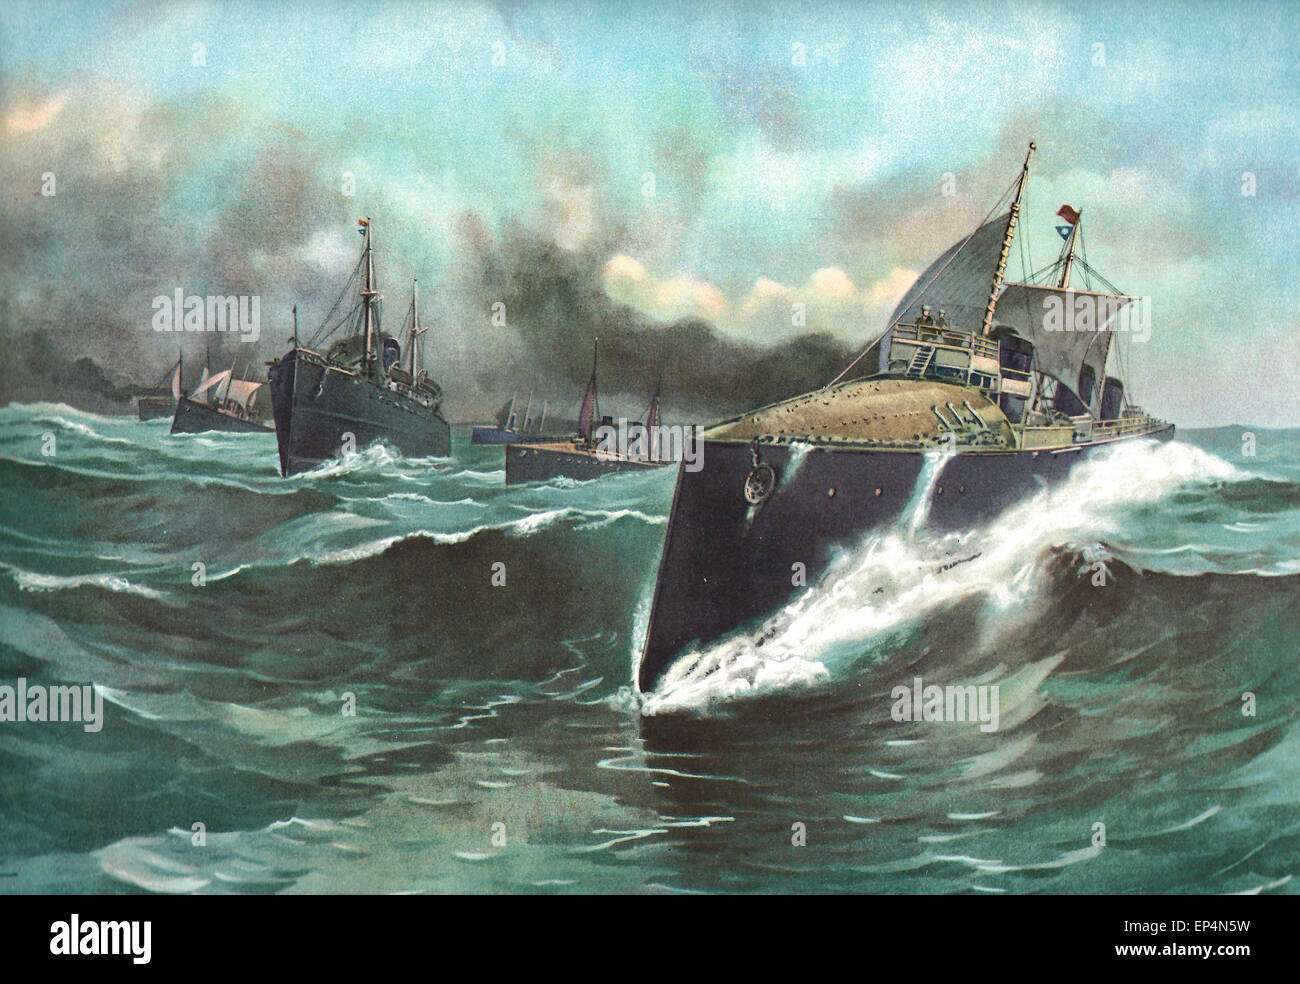 Spain's Torpedo Boat Flotilla en Route from the Canaries to Puerto Rico during the Spanish American War - Torpedo Boat Ariete, Torpedo Gunboat Pluton, Torpedo Gunboat Terror, Converted Merchantman Ciudad de Cadis, Torpedo Boat Rayo, Torpedo Boat Azor and Torpedo Boat Furor, 1898 Stock Photo